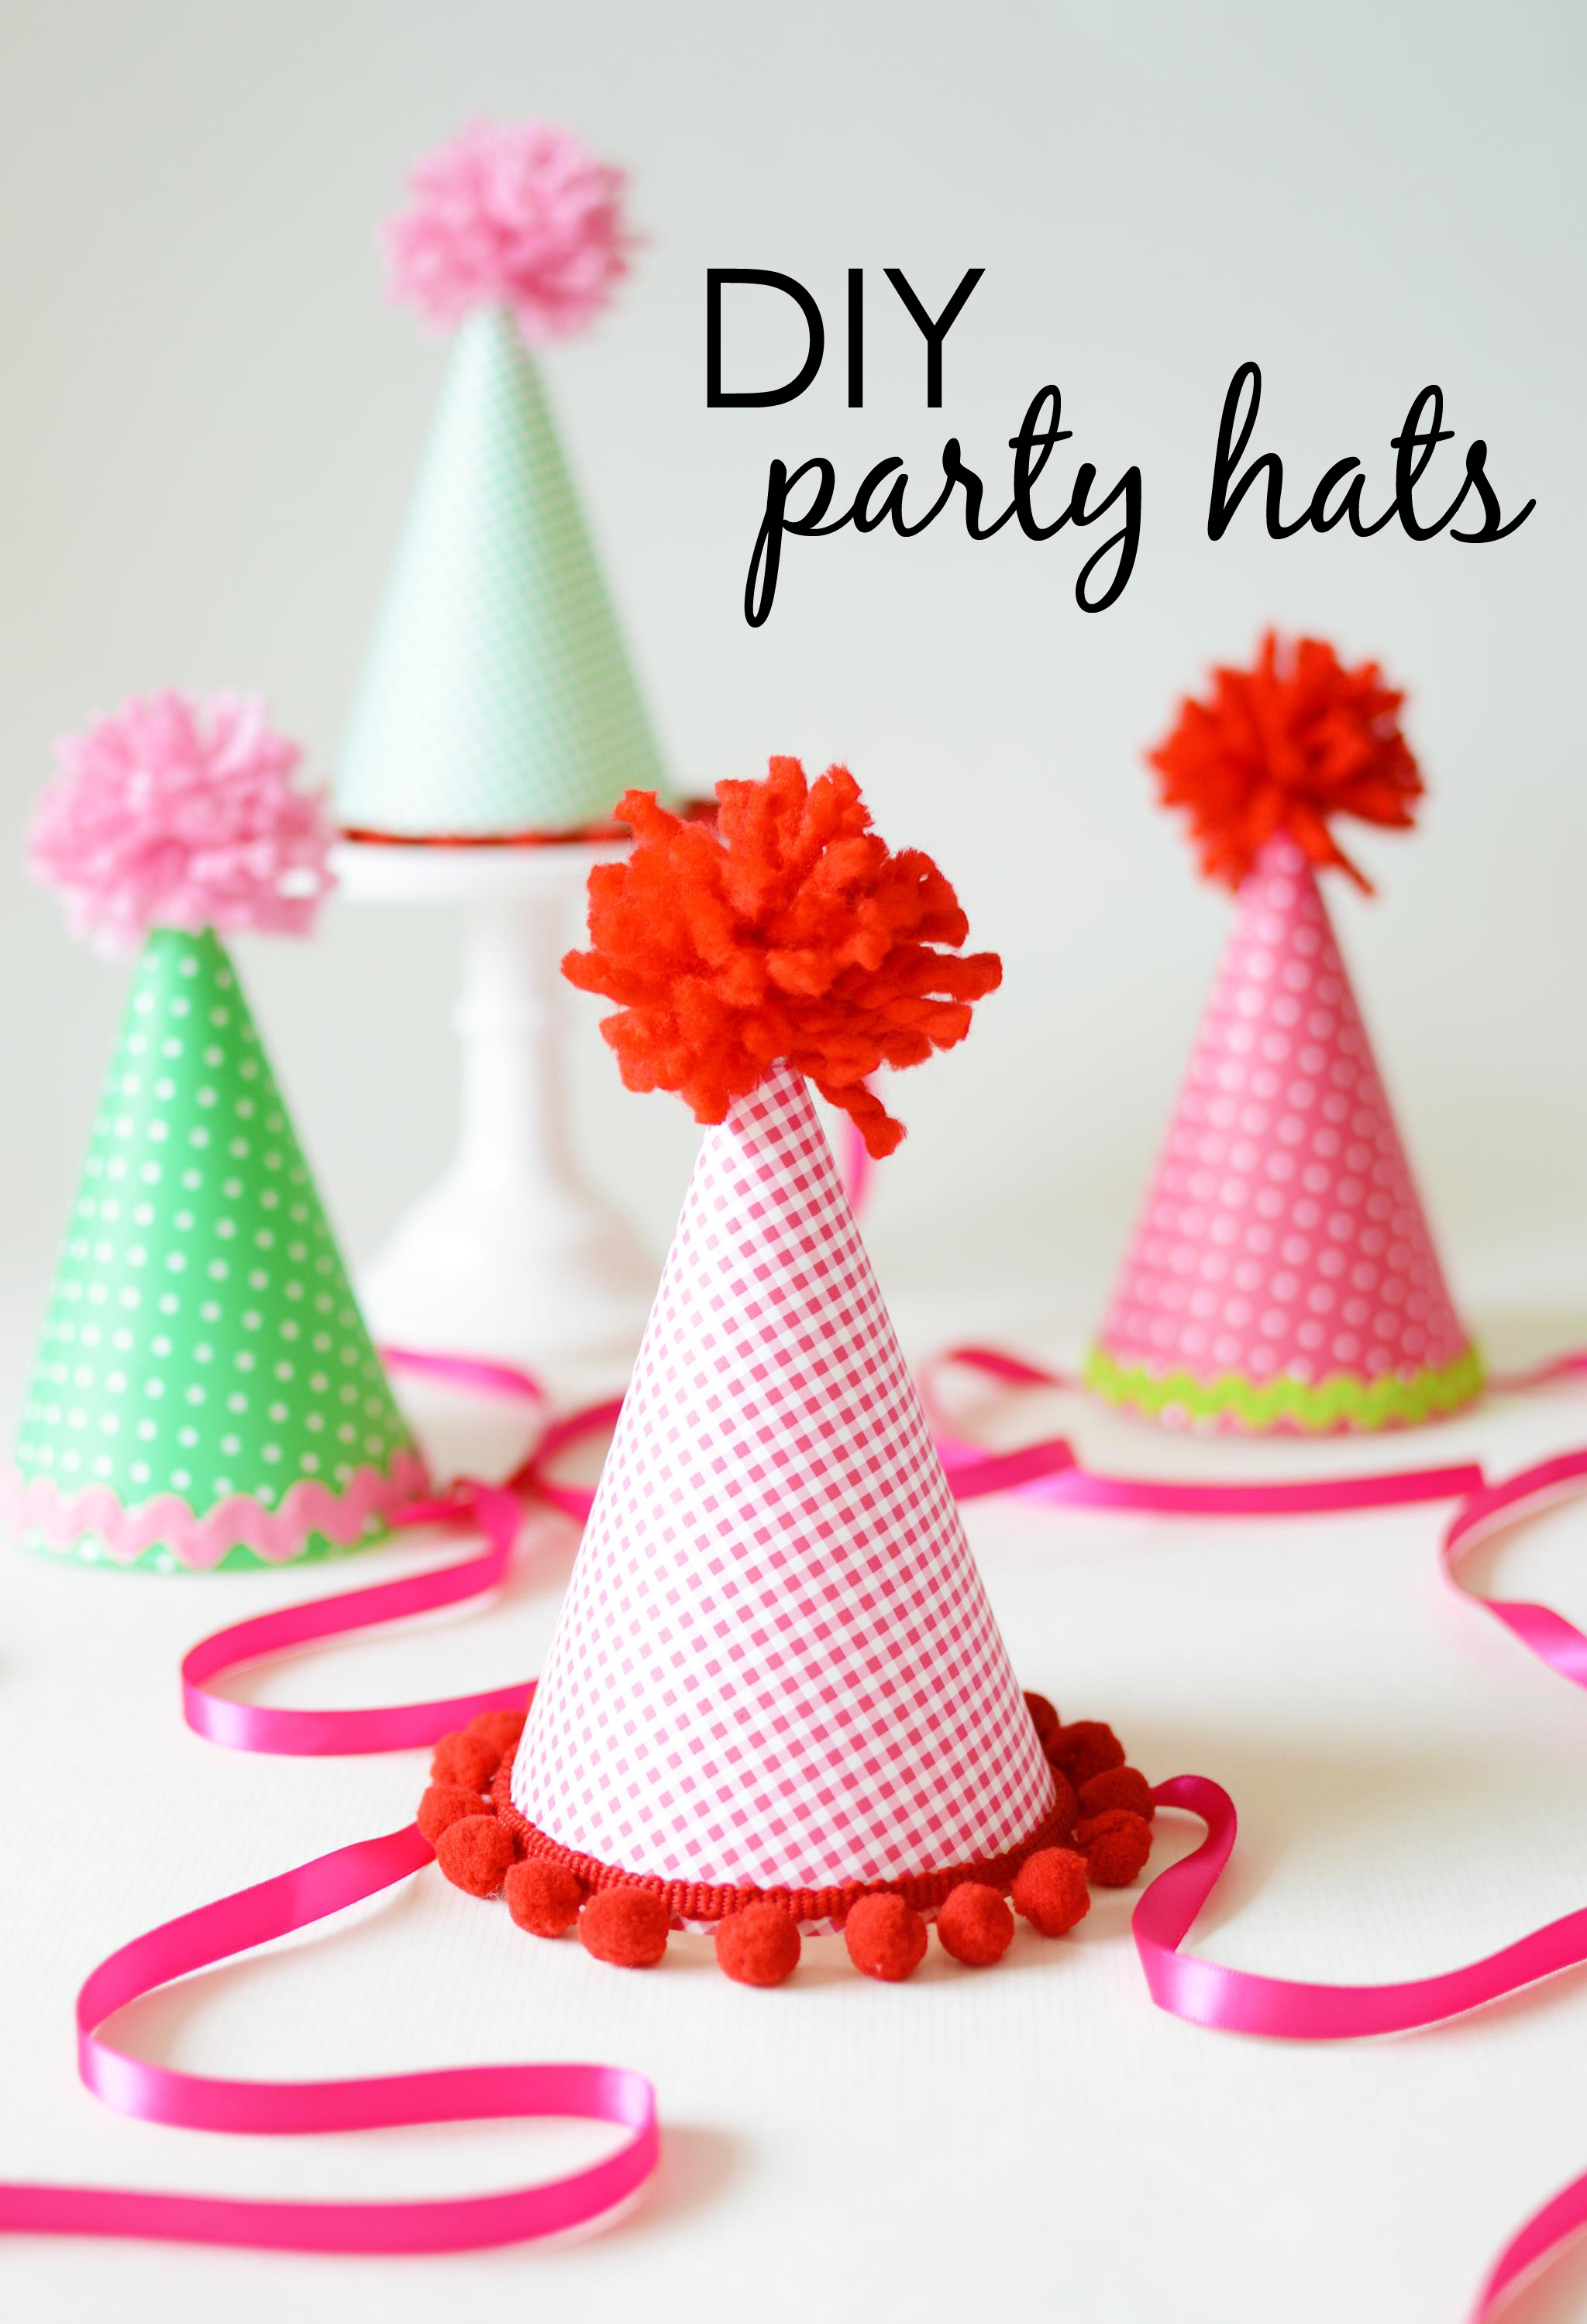 printable-party-hat-for-any-occasion-themamasgirls-party-hat-template-party-hat-pattern